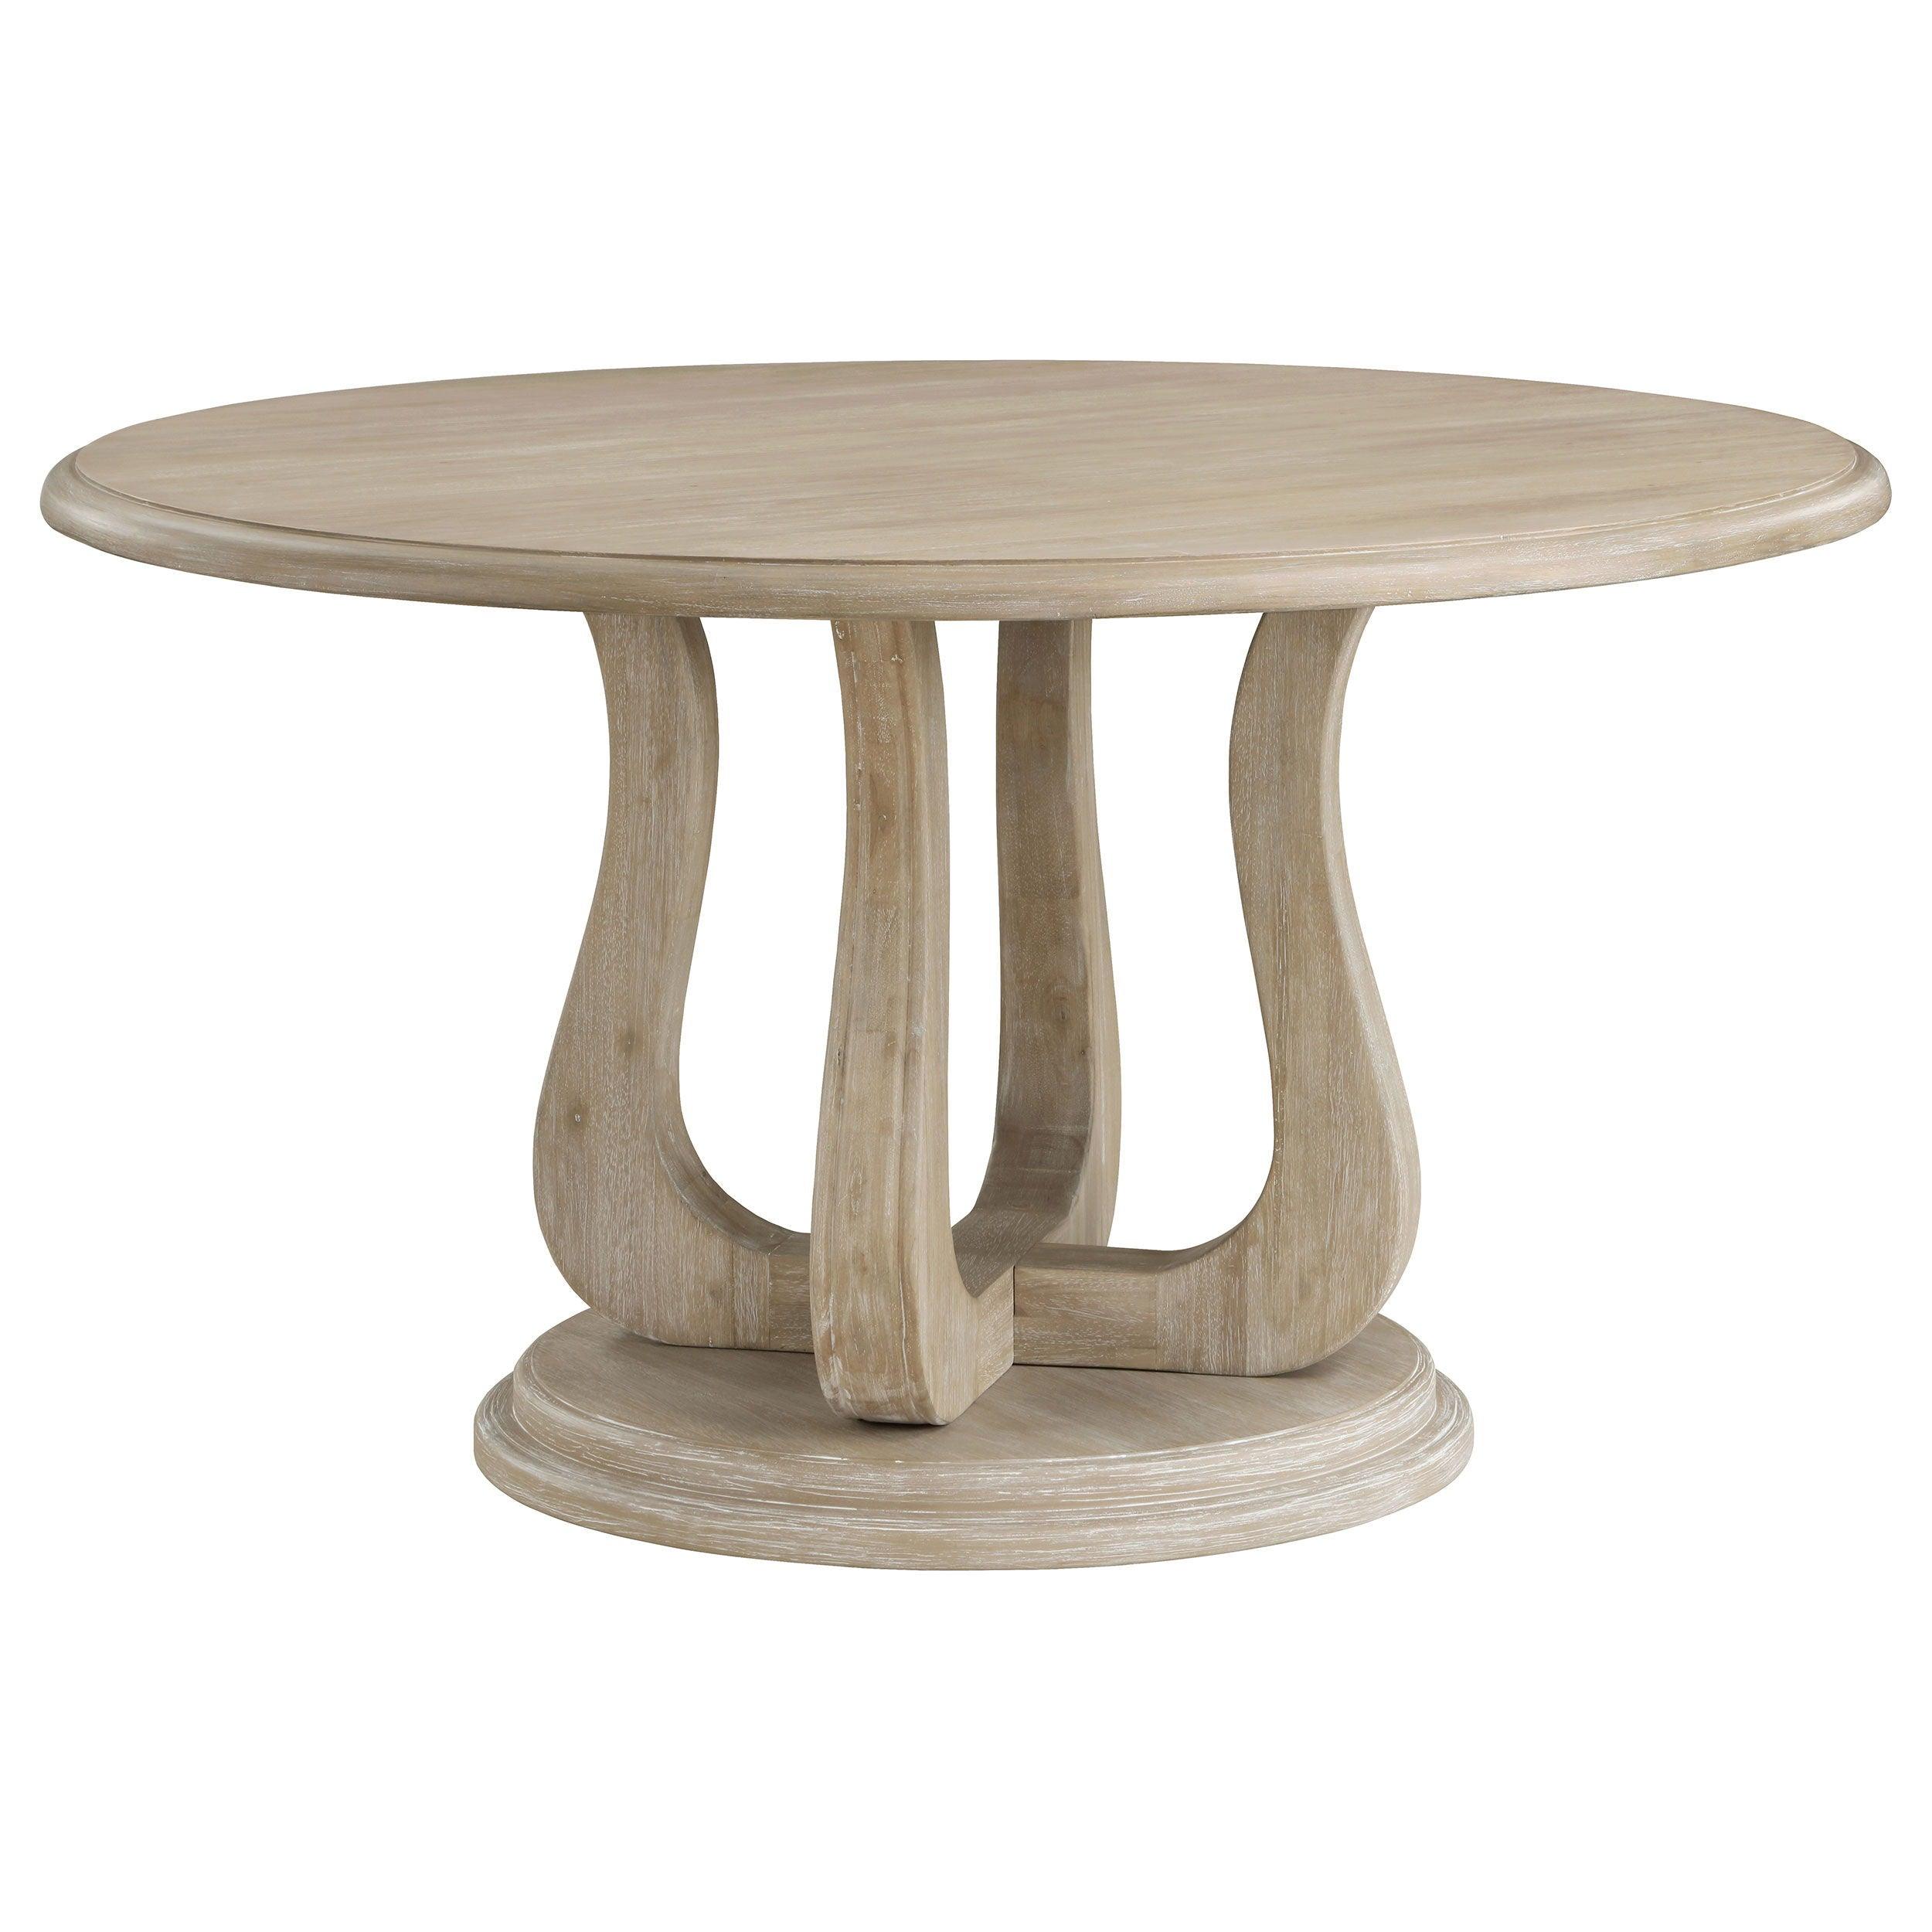 Coaster Fine Furniture - Trofello - Round Dining Table With Curved Pedestal Base - White Washed - 5th Avenue Furniture